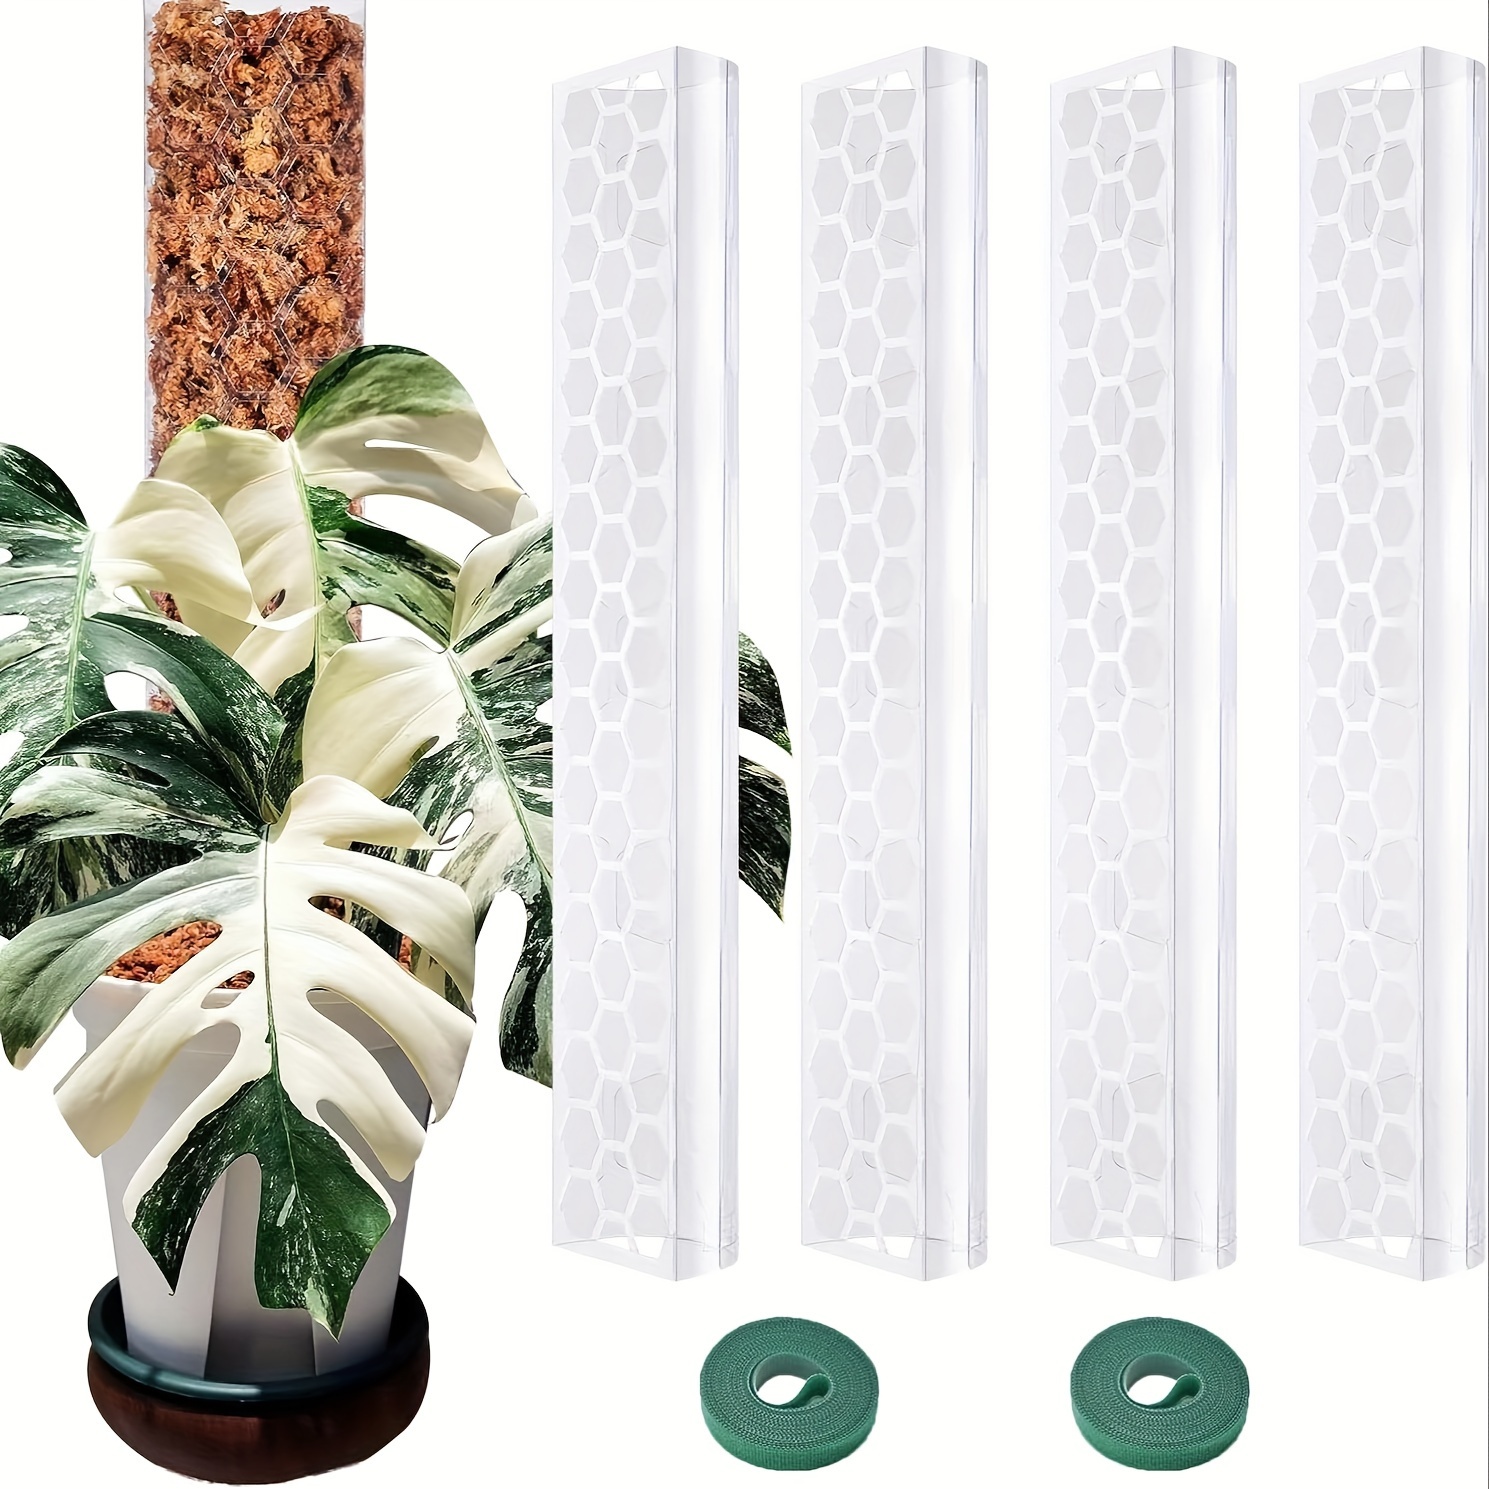 

4 Pcs 17 Inch Plastic Moss Pole For Plants Monstera, Stackable Plant Support For Indoor Climbing Plants, Clear Plant Poles With 2pcs Garden Ties Work With Sphagnum Moss